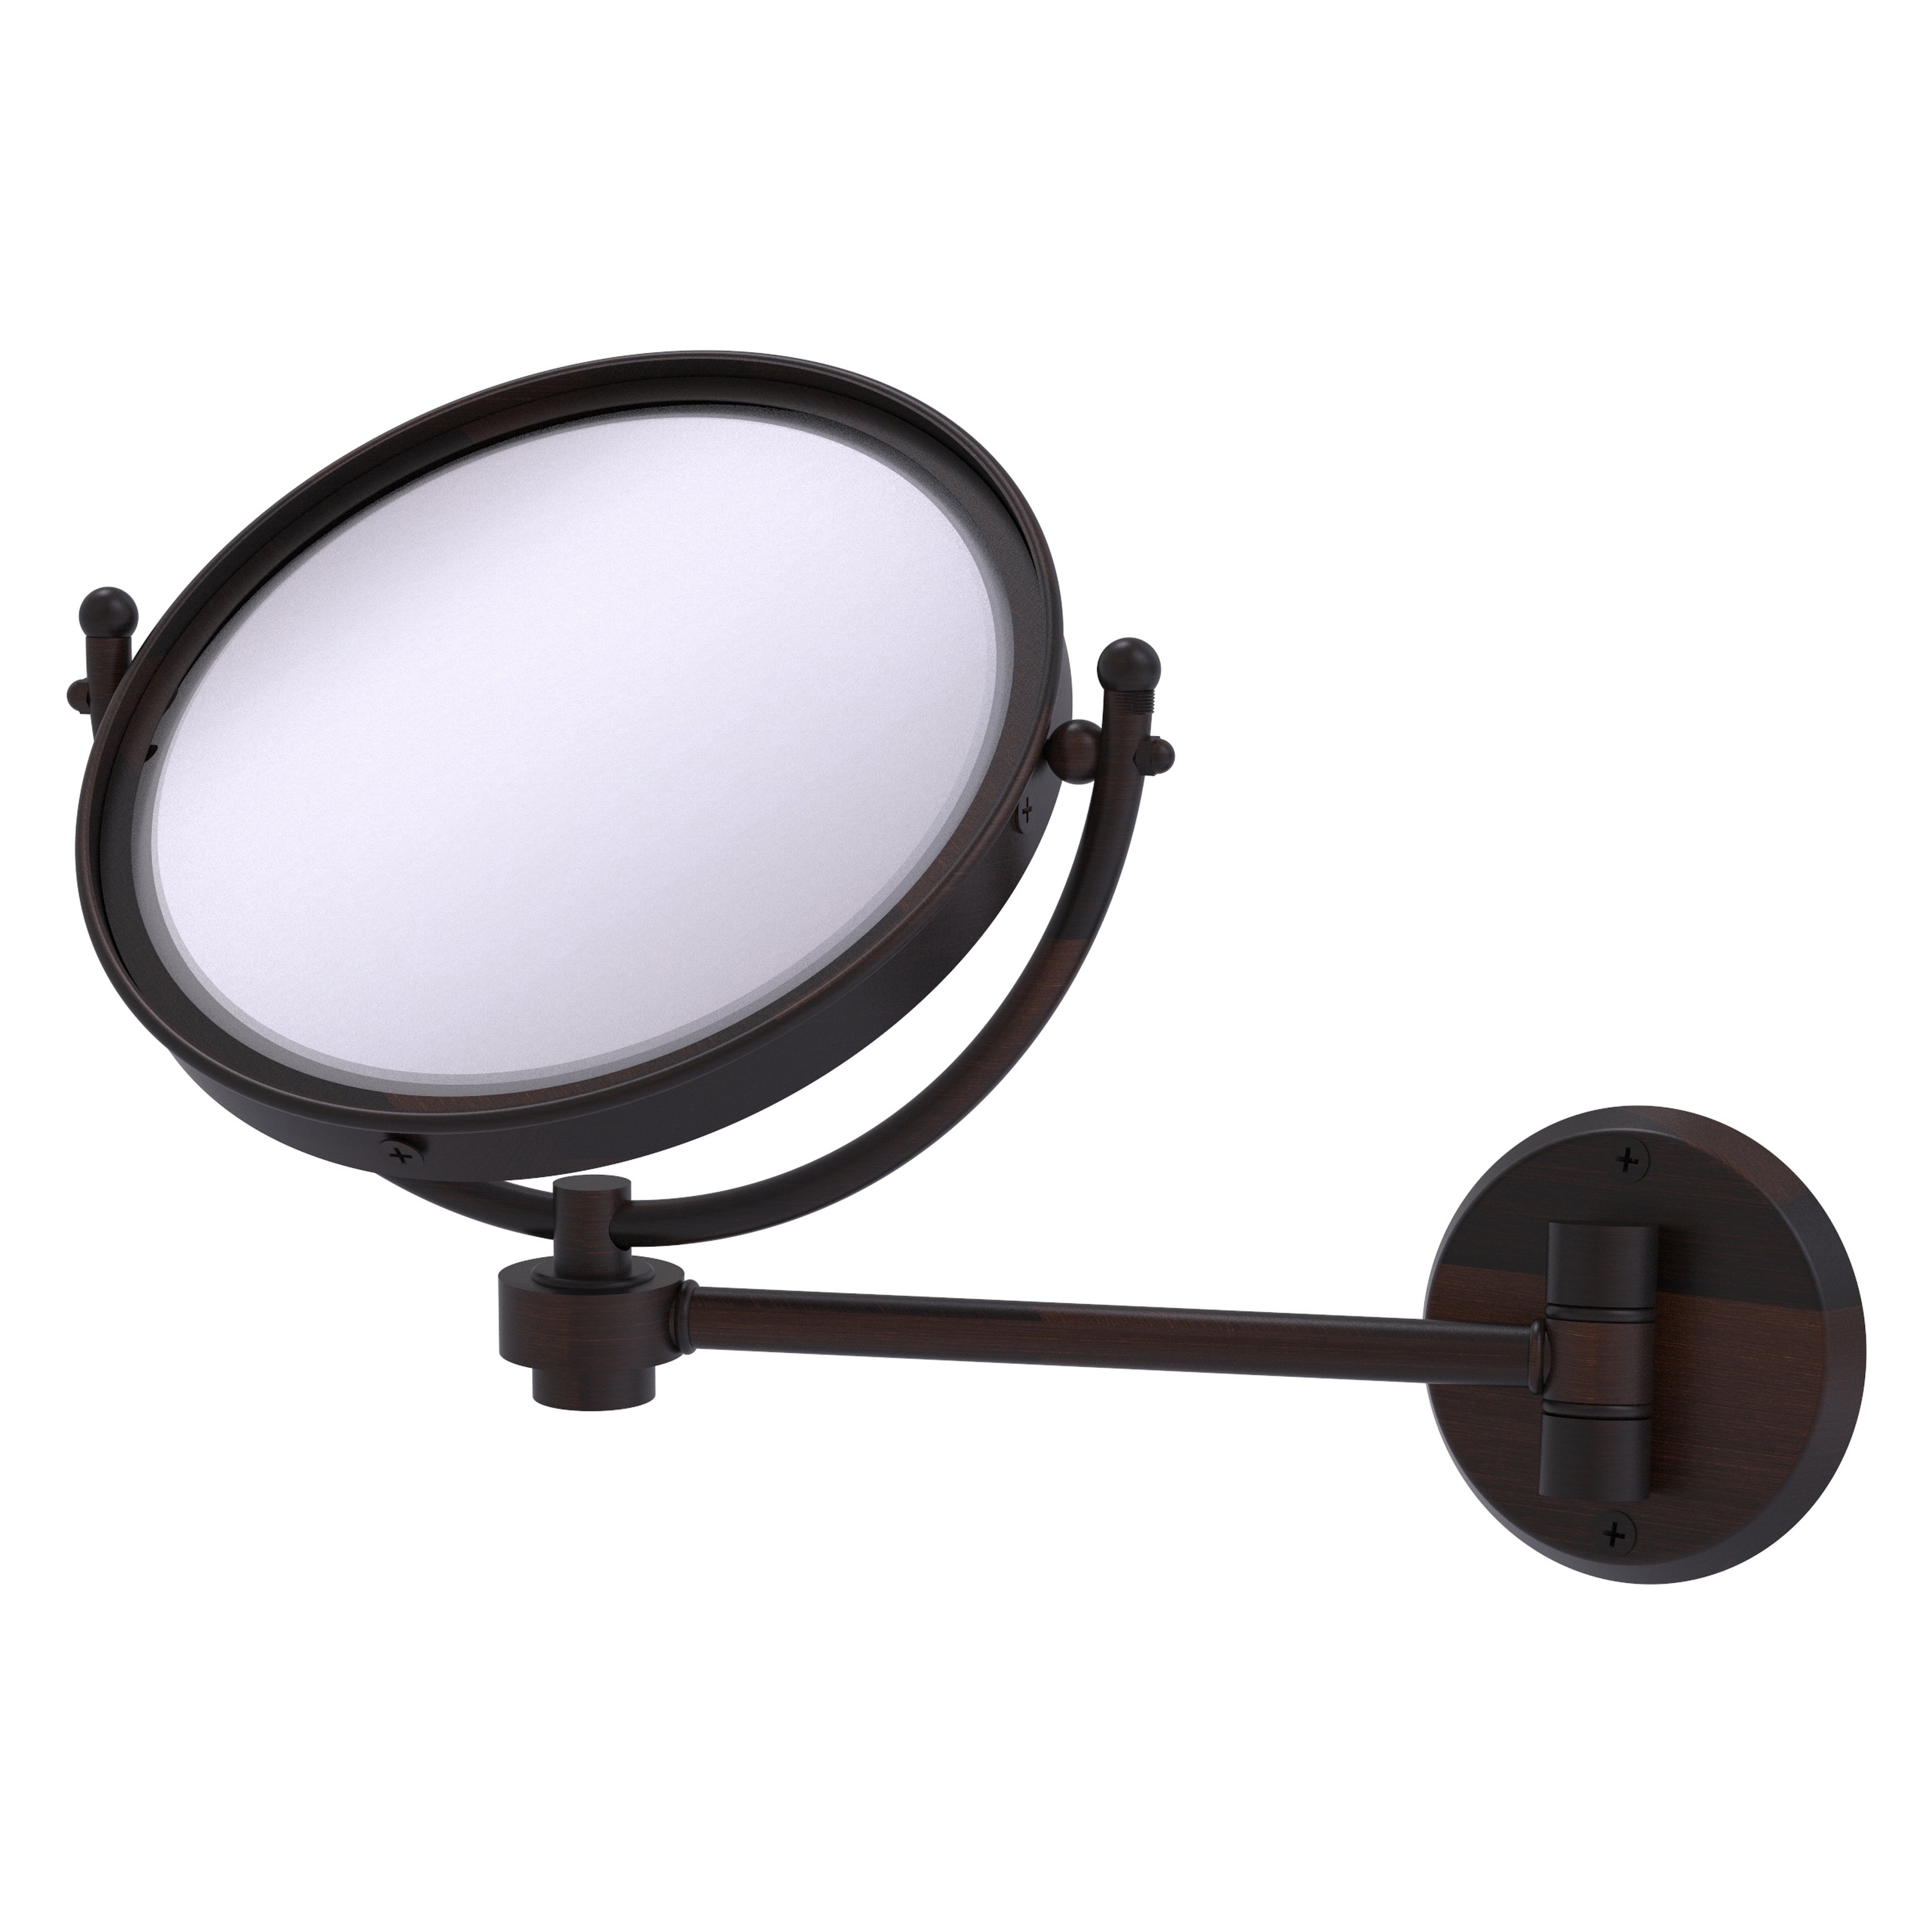 8-in x 10-in Distressed White Double-sided 2X Magnifying Wall-mounted Vanity Mirror | - Allied Brass WM-5/2X-VB